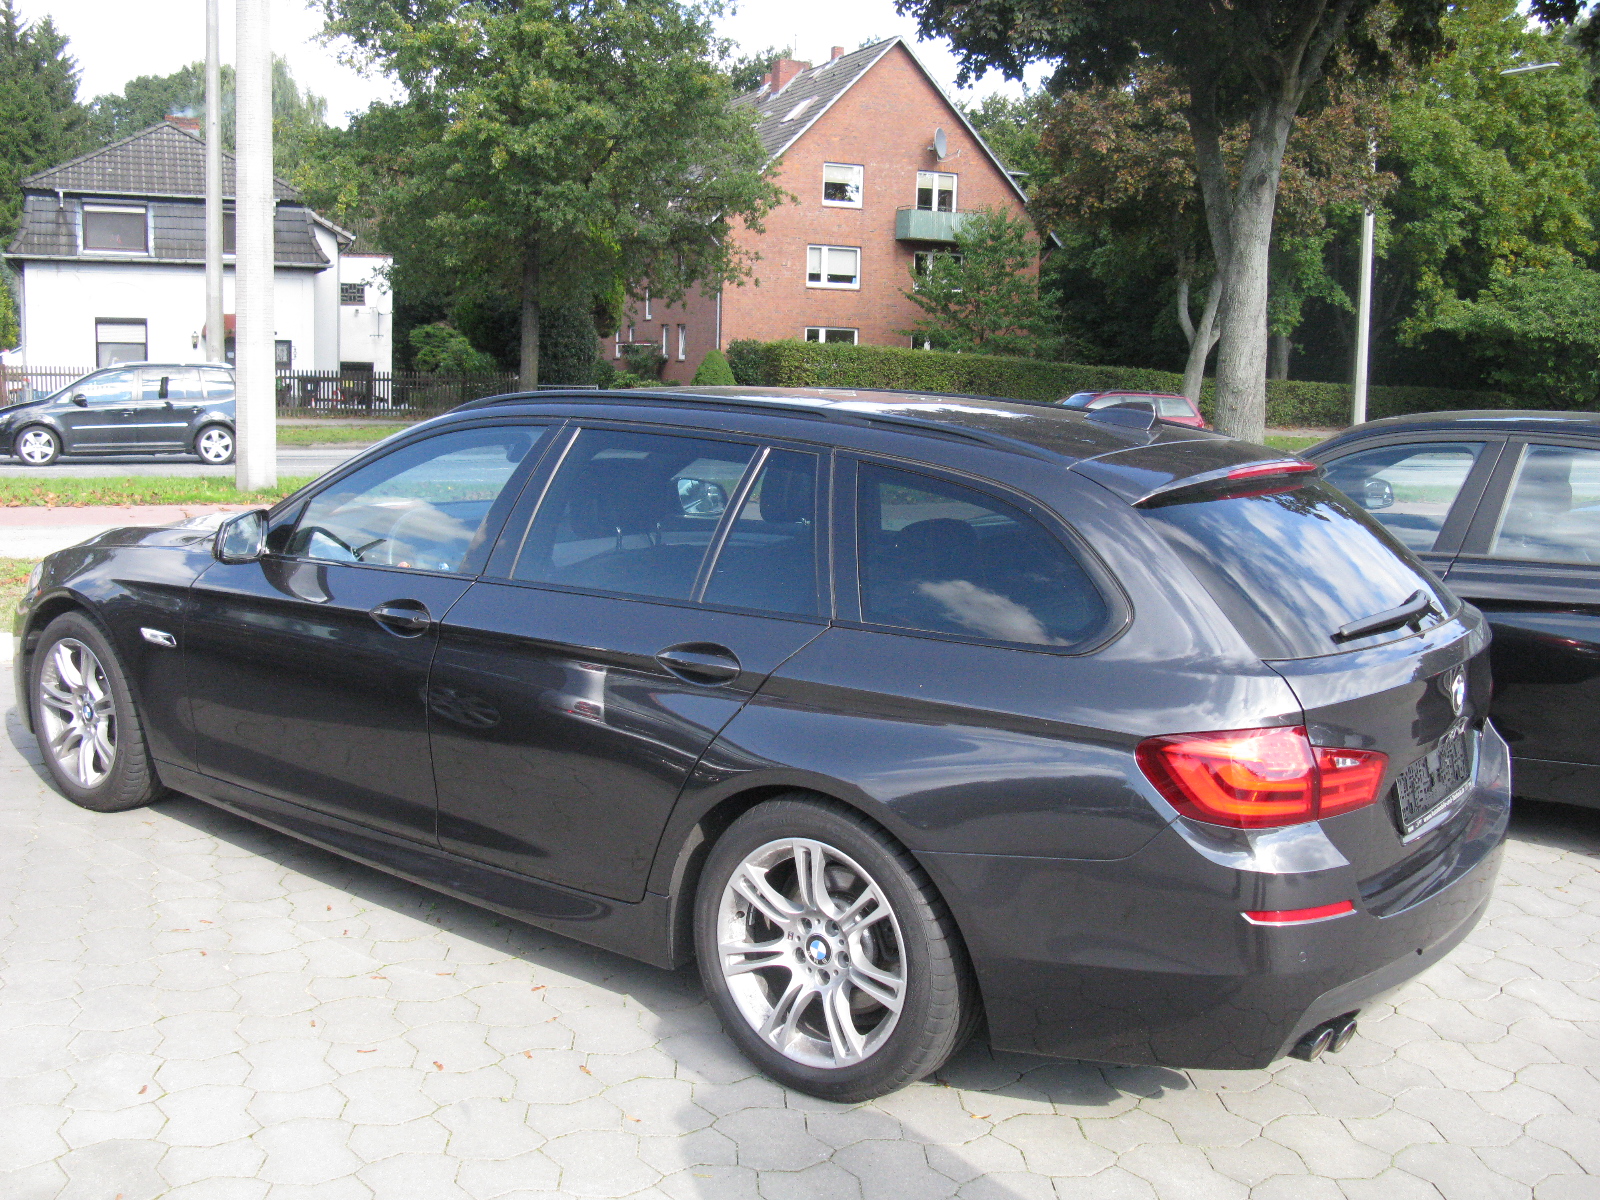 the black bmw car is parked in a driveway